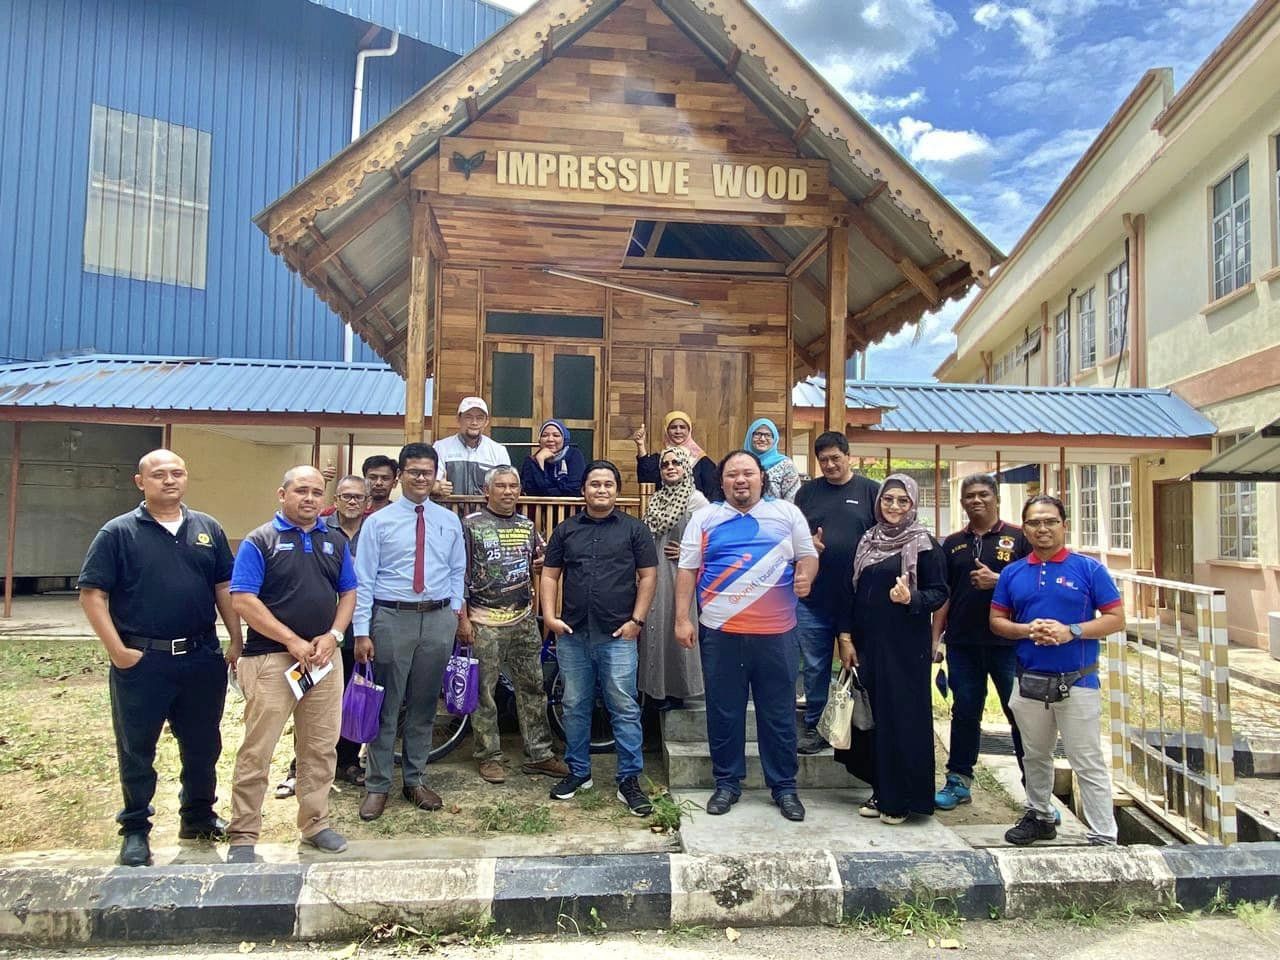 The Learning Trip for DPMM Entrepreneurs to Impressive Wood